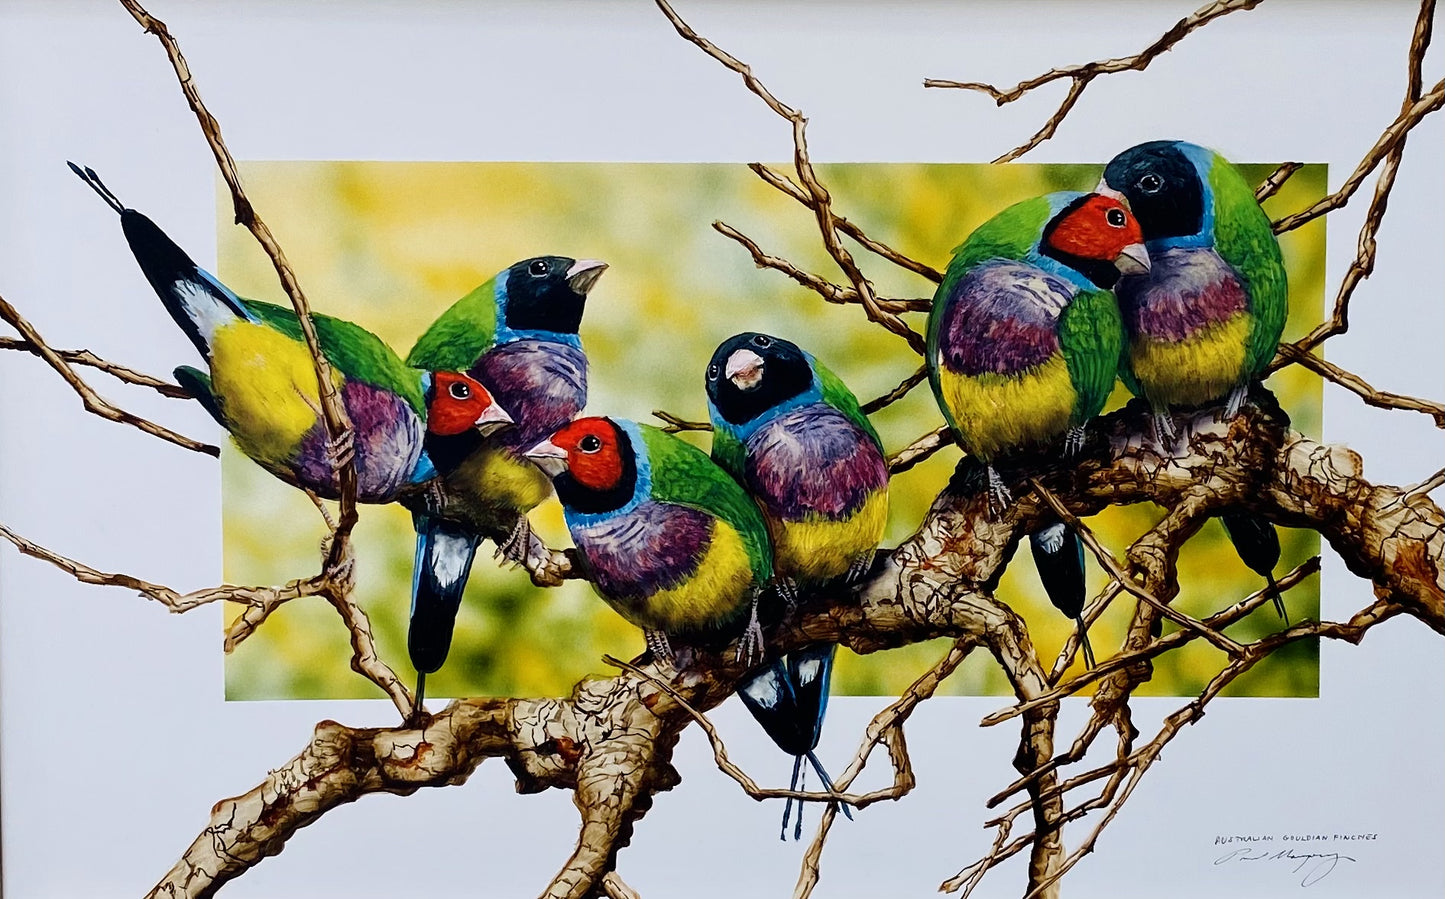 Sunday, Monday, Happy Days, Gouldian Finches